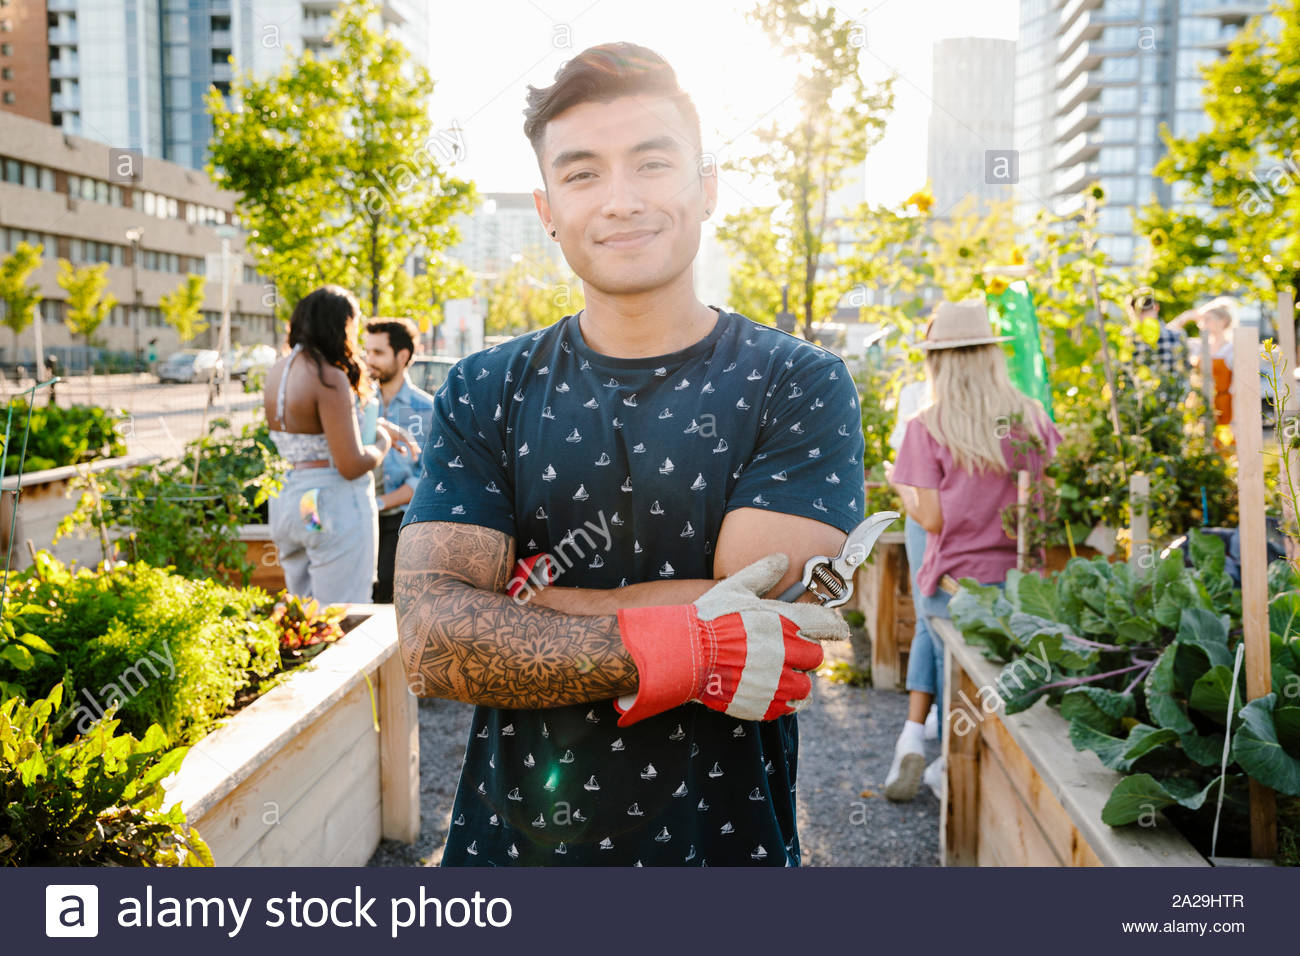 Portrait confident young man with pruning shears in sunny, urban community garden Stock Photo